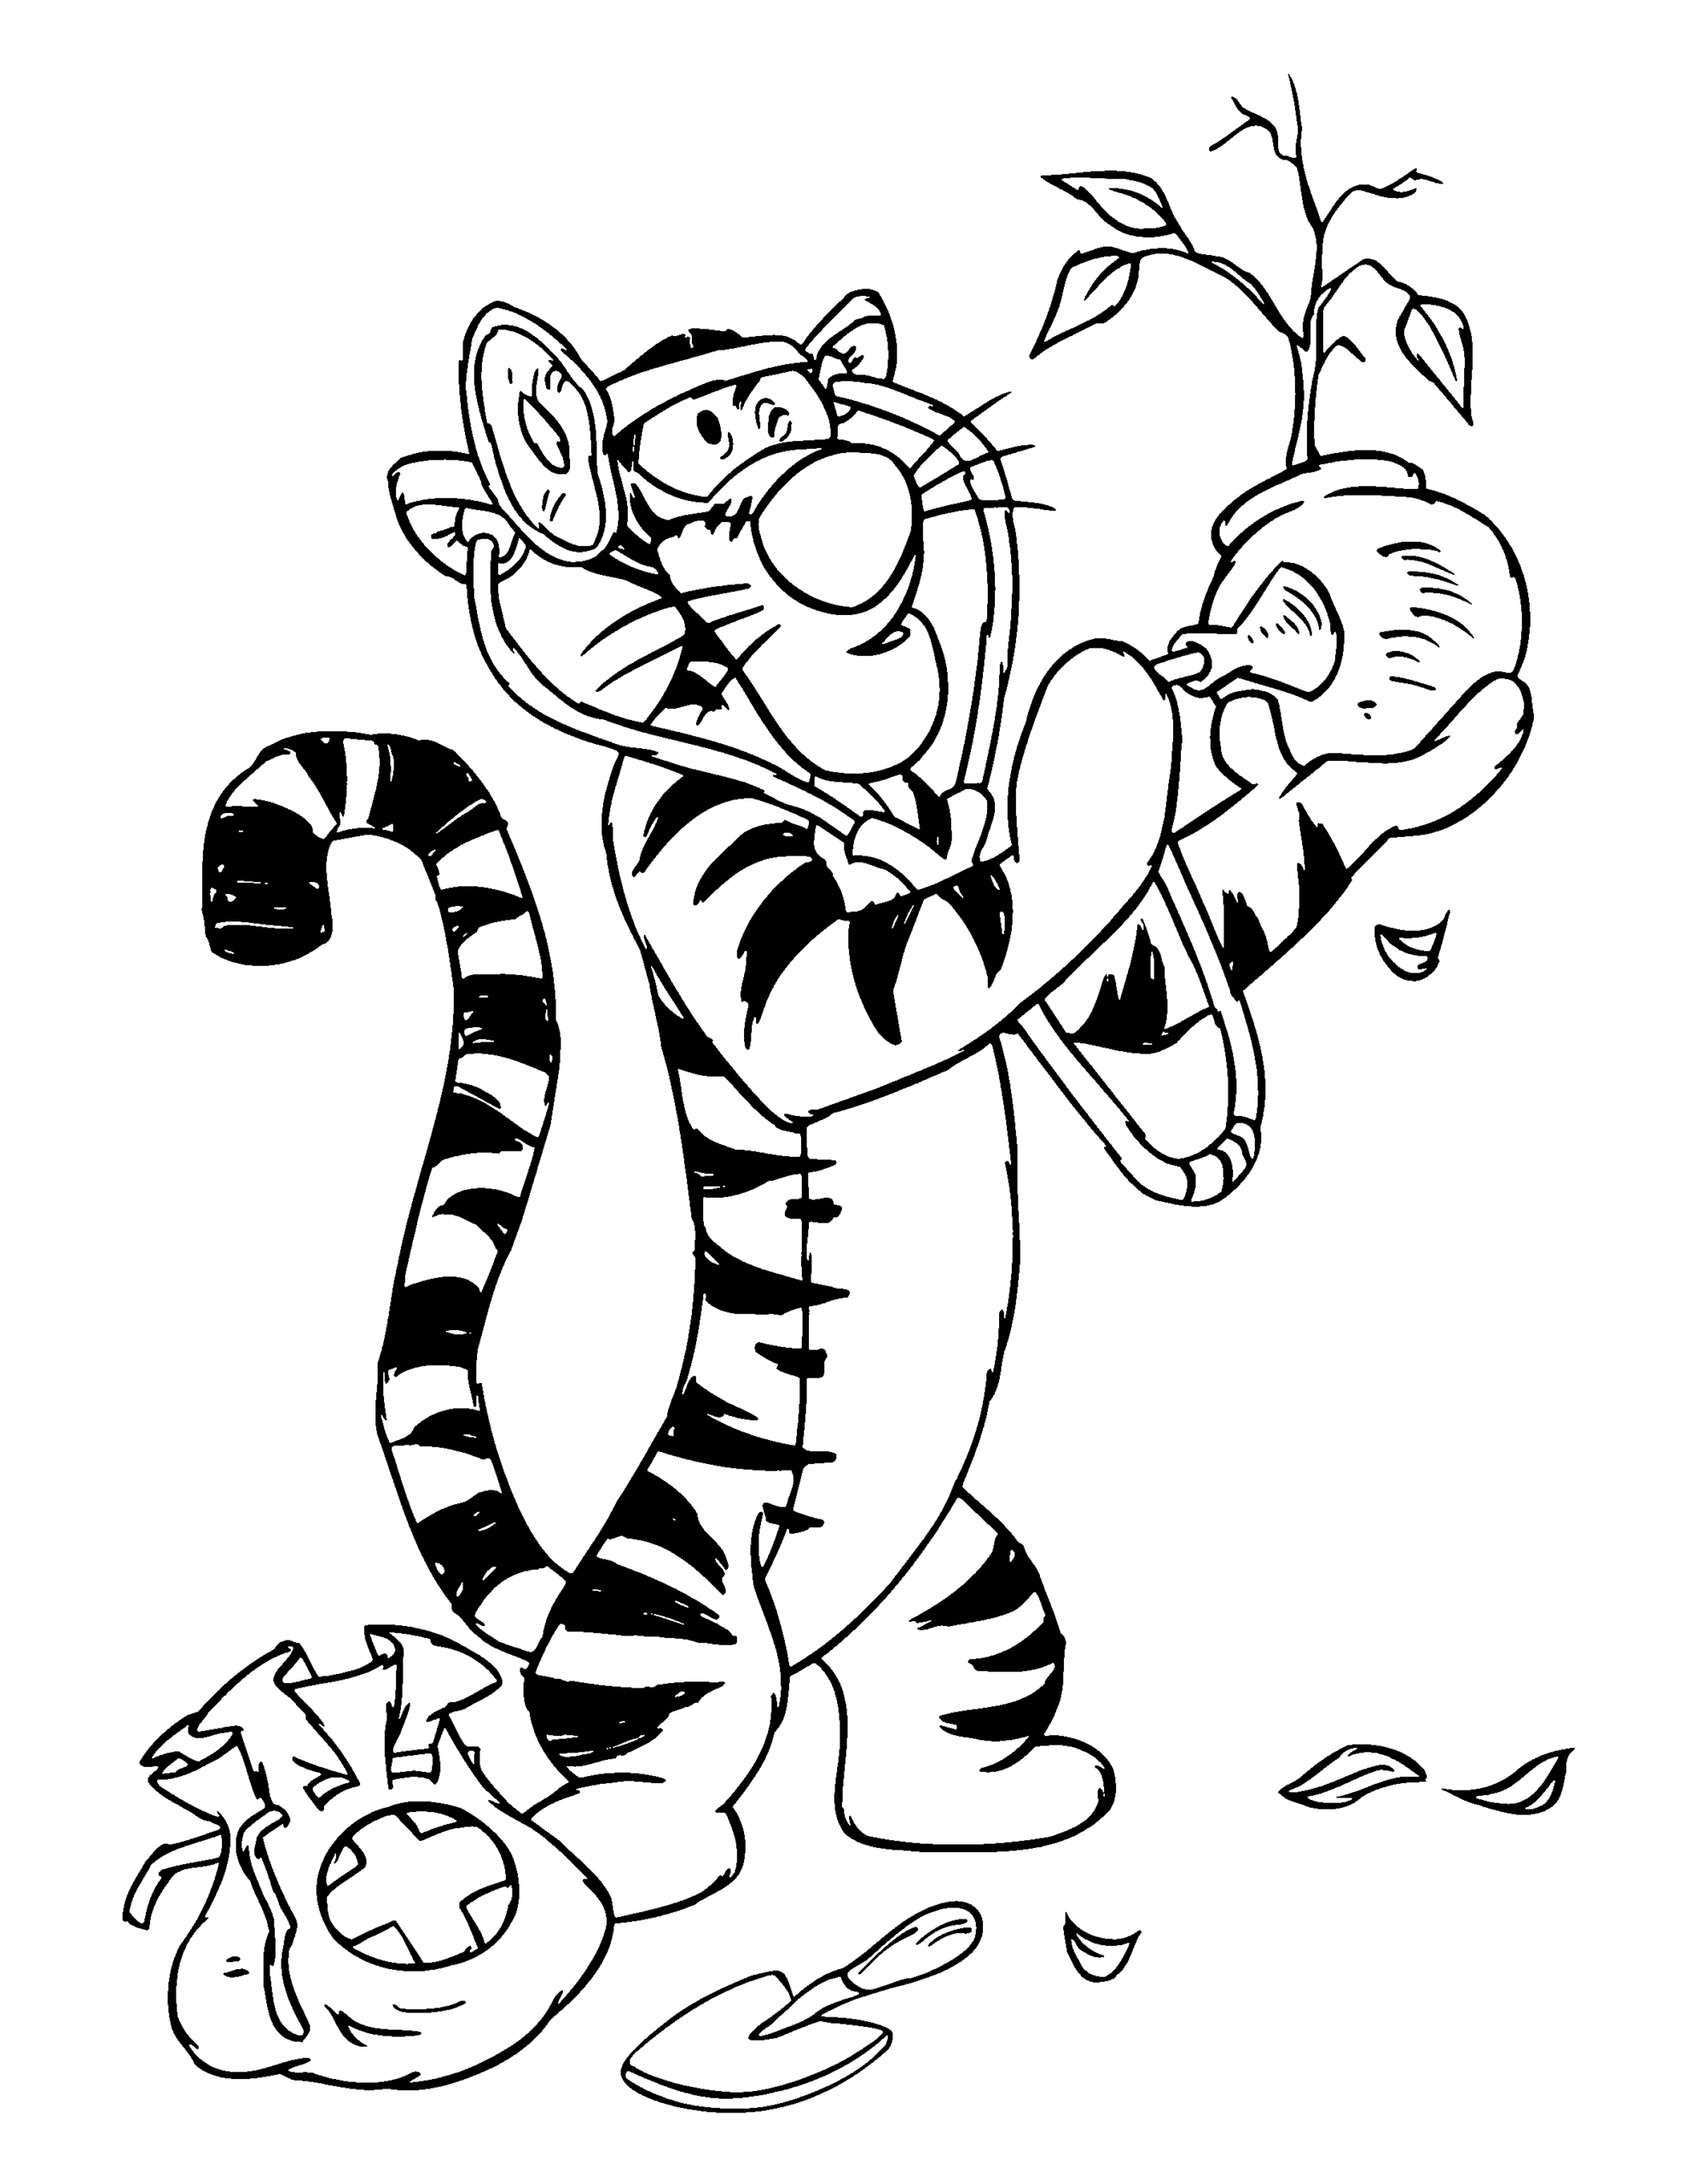 Winnie the Pooh Coloring Pages Cartoons winnie the pooh 55 Printable 2020 7168 Coloring4free